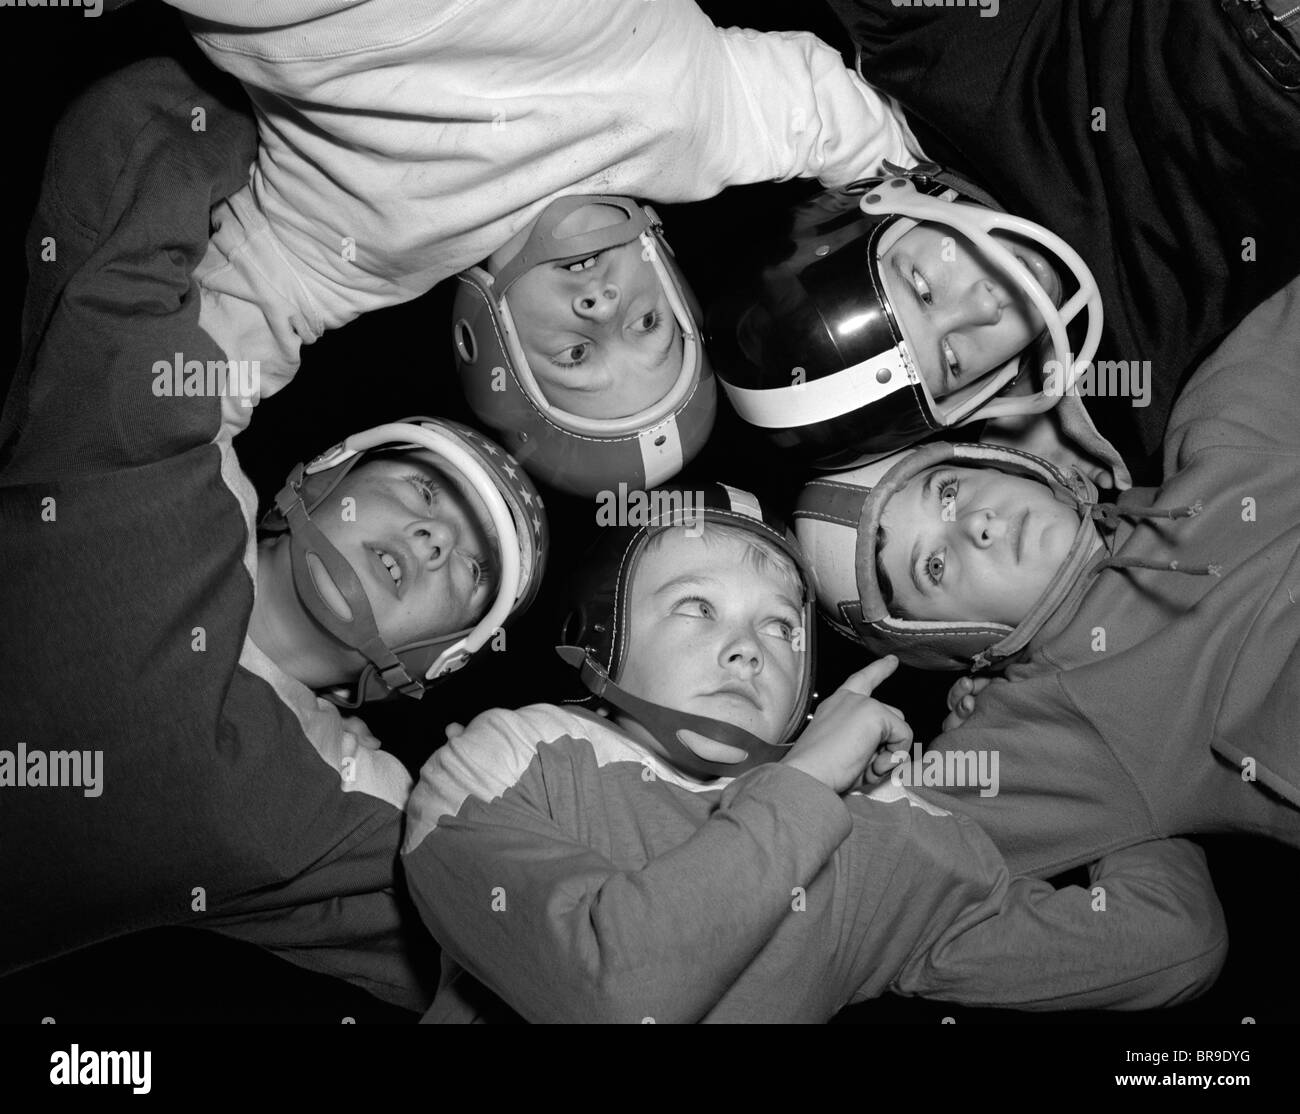 1960s FIVE BOYS IN HUDDLE WEARING HELMETS & FOOTBALL JERSEYS THE VIEW IS FROM INSIDE THE HUDDLE LOOKING UP Stock Photo